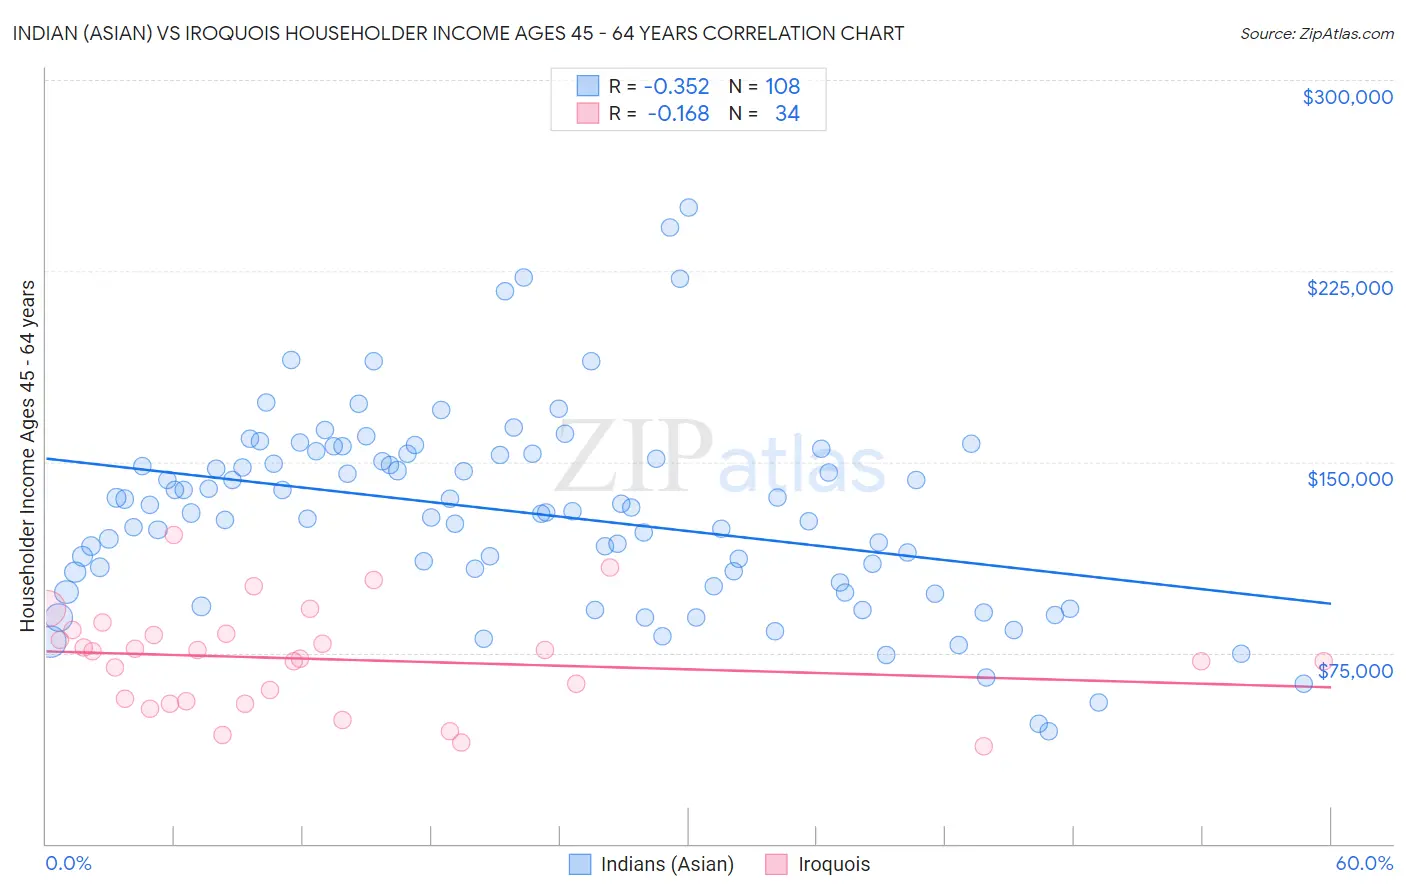 Indian (Asian) vs Iroquois Householder Income Ages 45 - 64 years